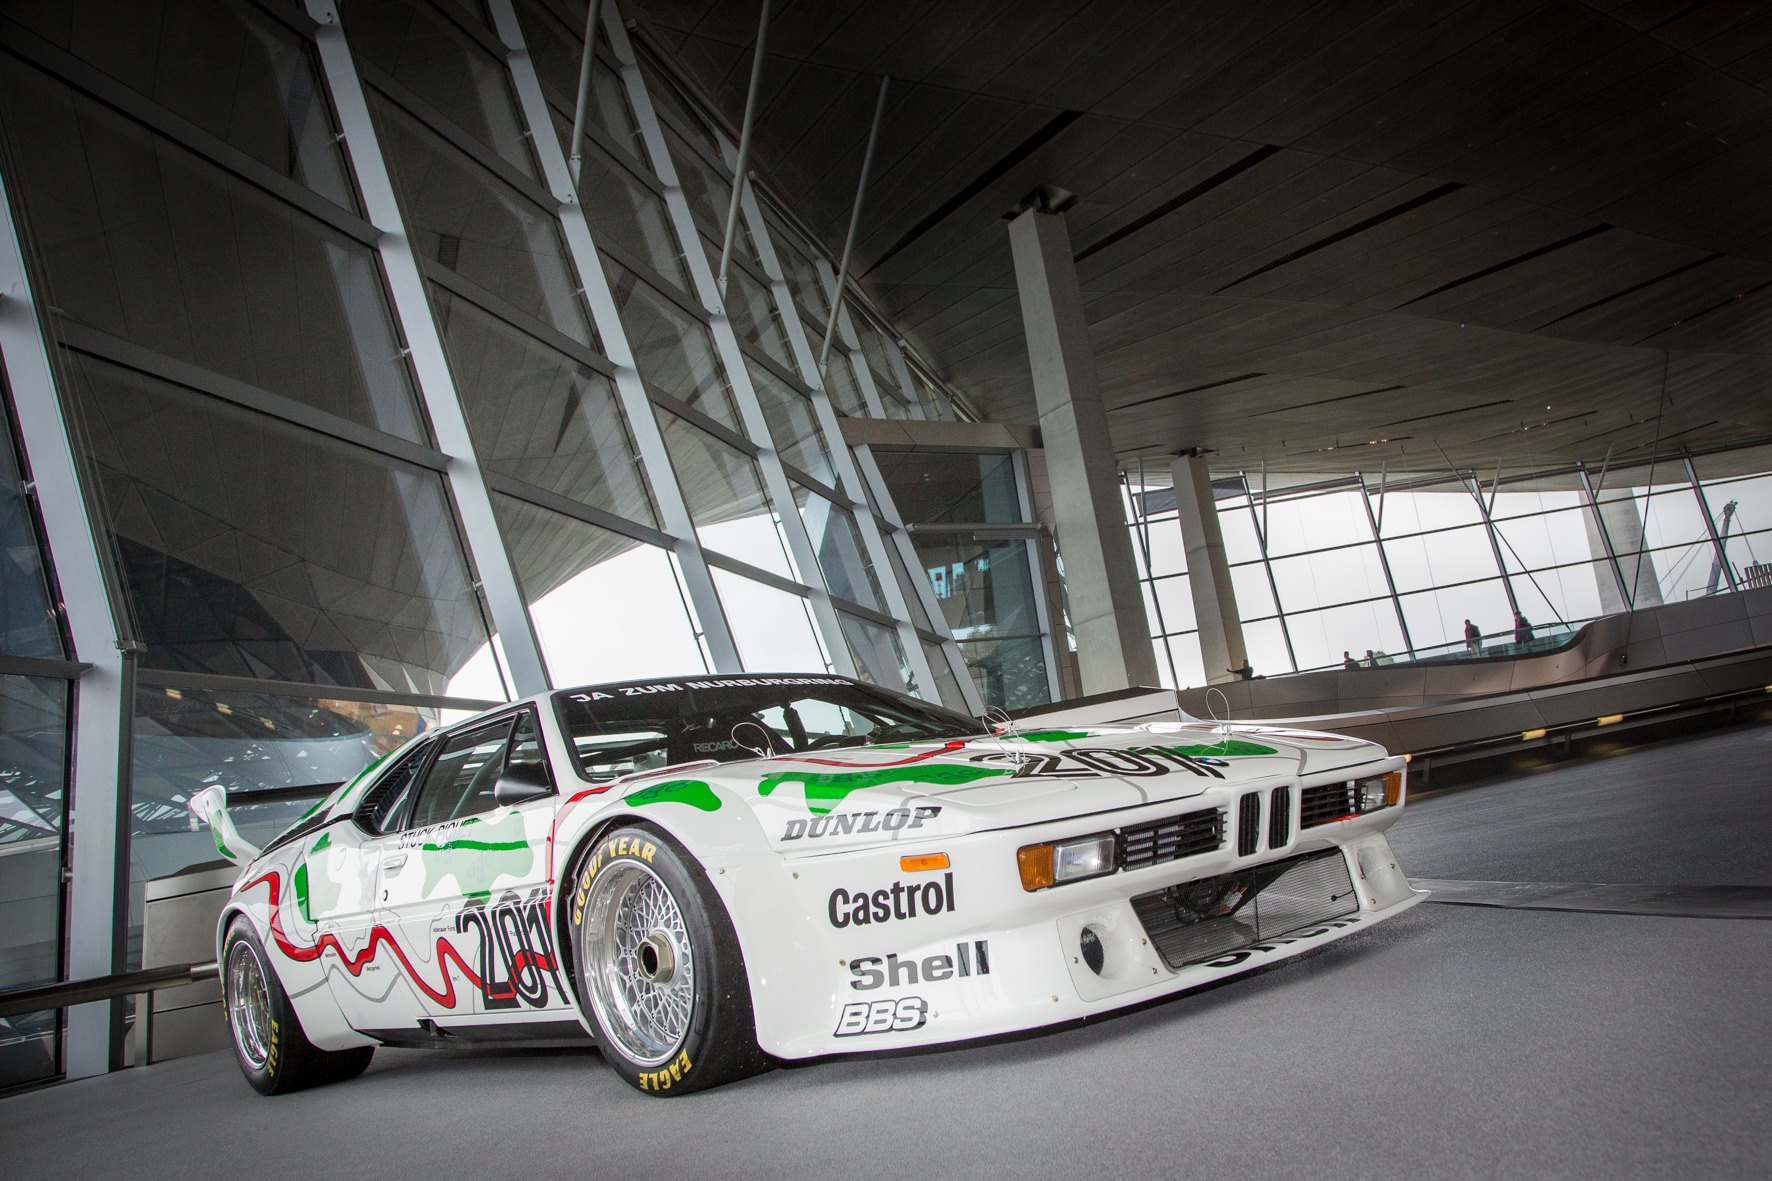 The BMW M1 Procar “Yes to the Nürburgring”1772 x 1181